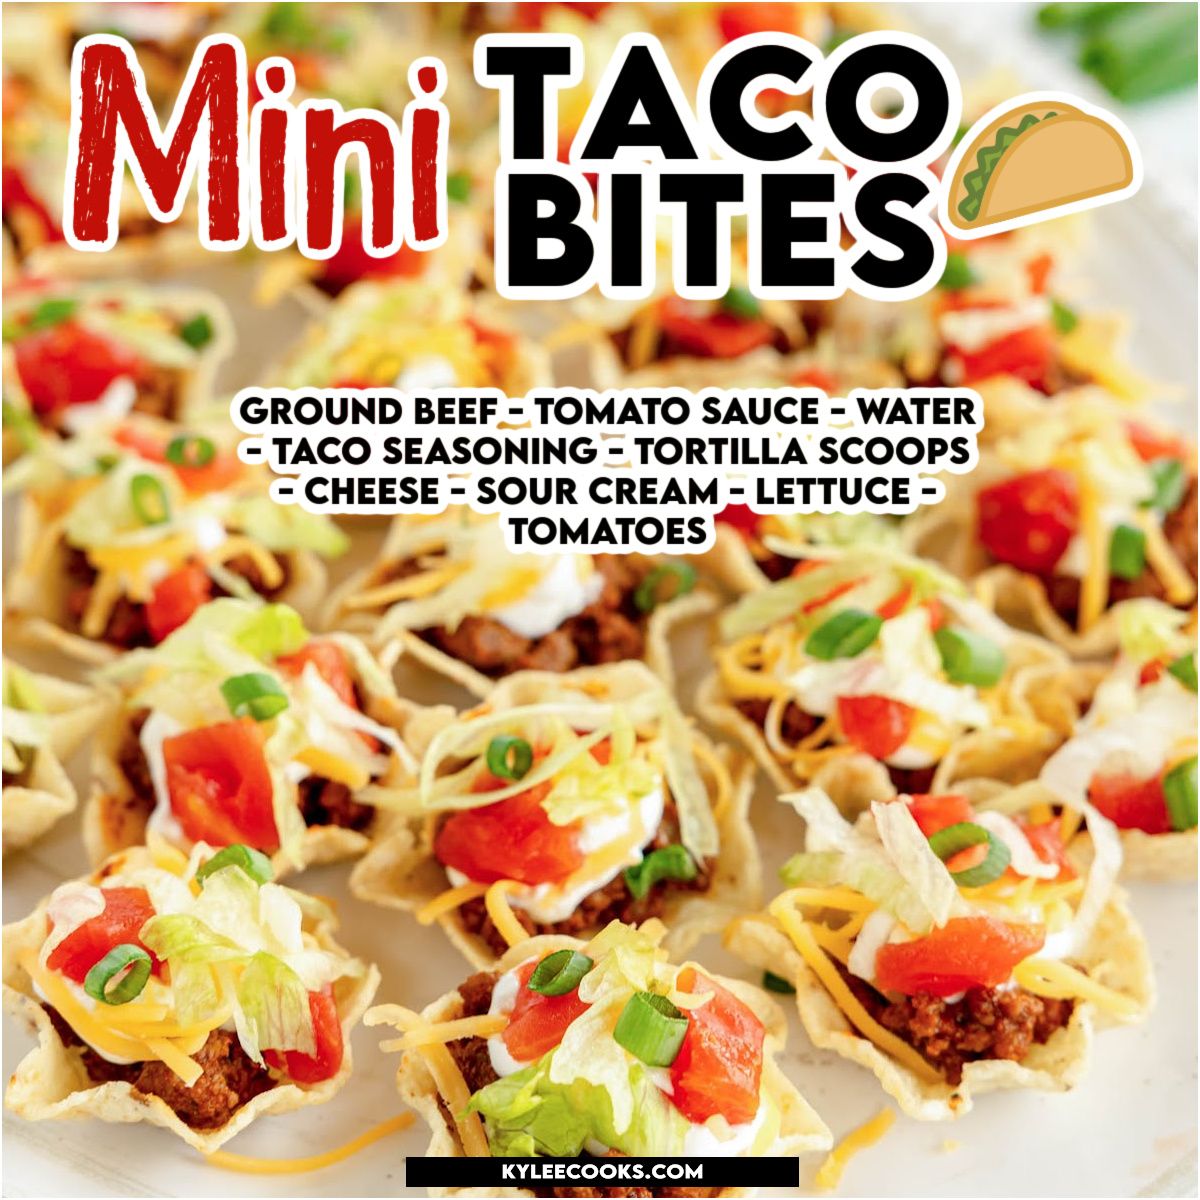 🌮 Mini Taco Bites Alert! Transform your favorite dish into bite-sized fun. Perfect for parties, these little scoops of joy are the cutest way to enjoy taco night in just one bite! 🎉 #MiniTacoBites #TacoLove #PartySnacks #FunFood #kyleecooks kyleecooks.com/taco-bites/